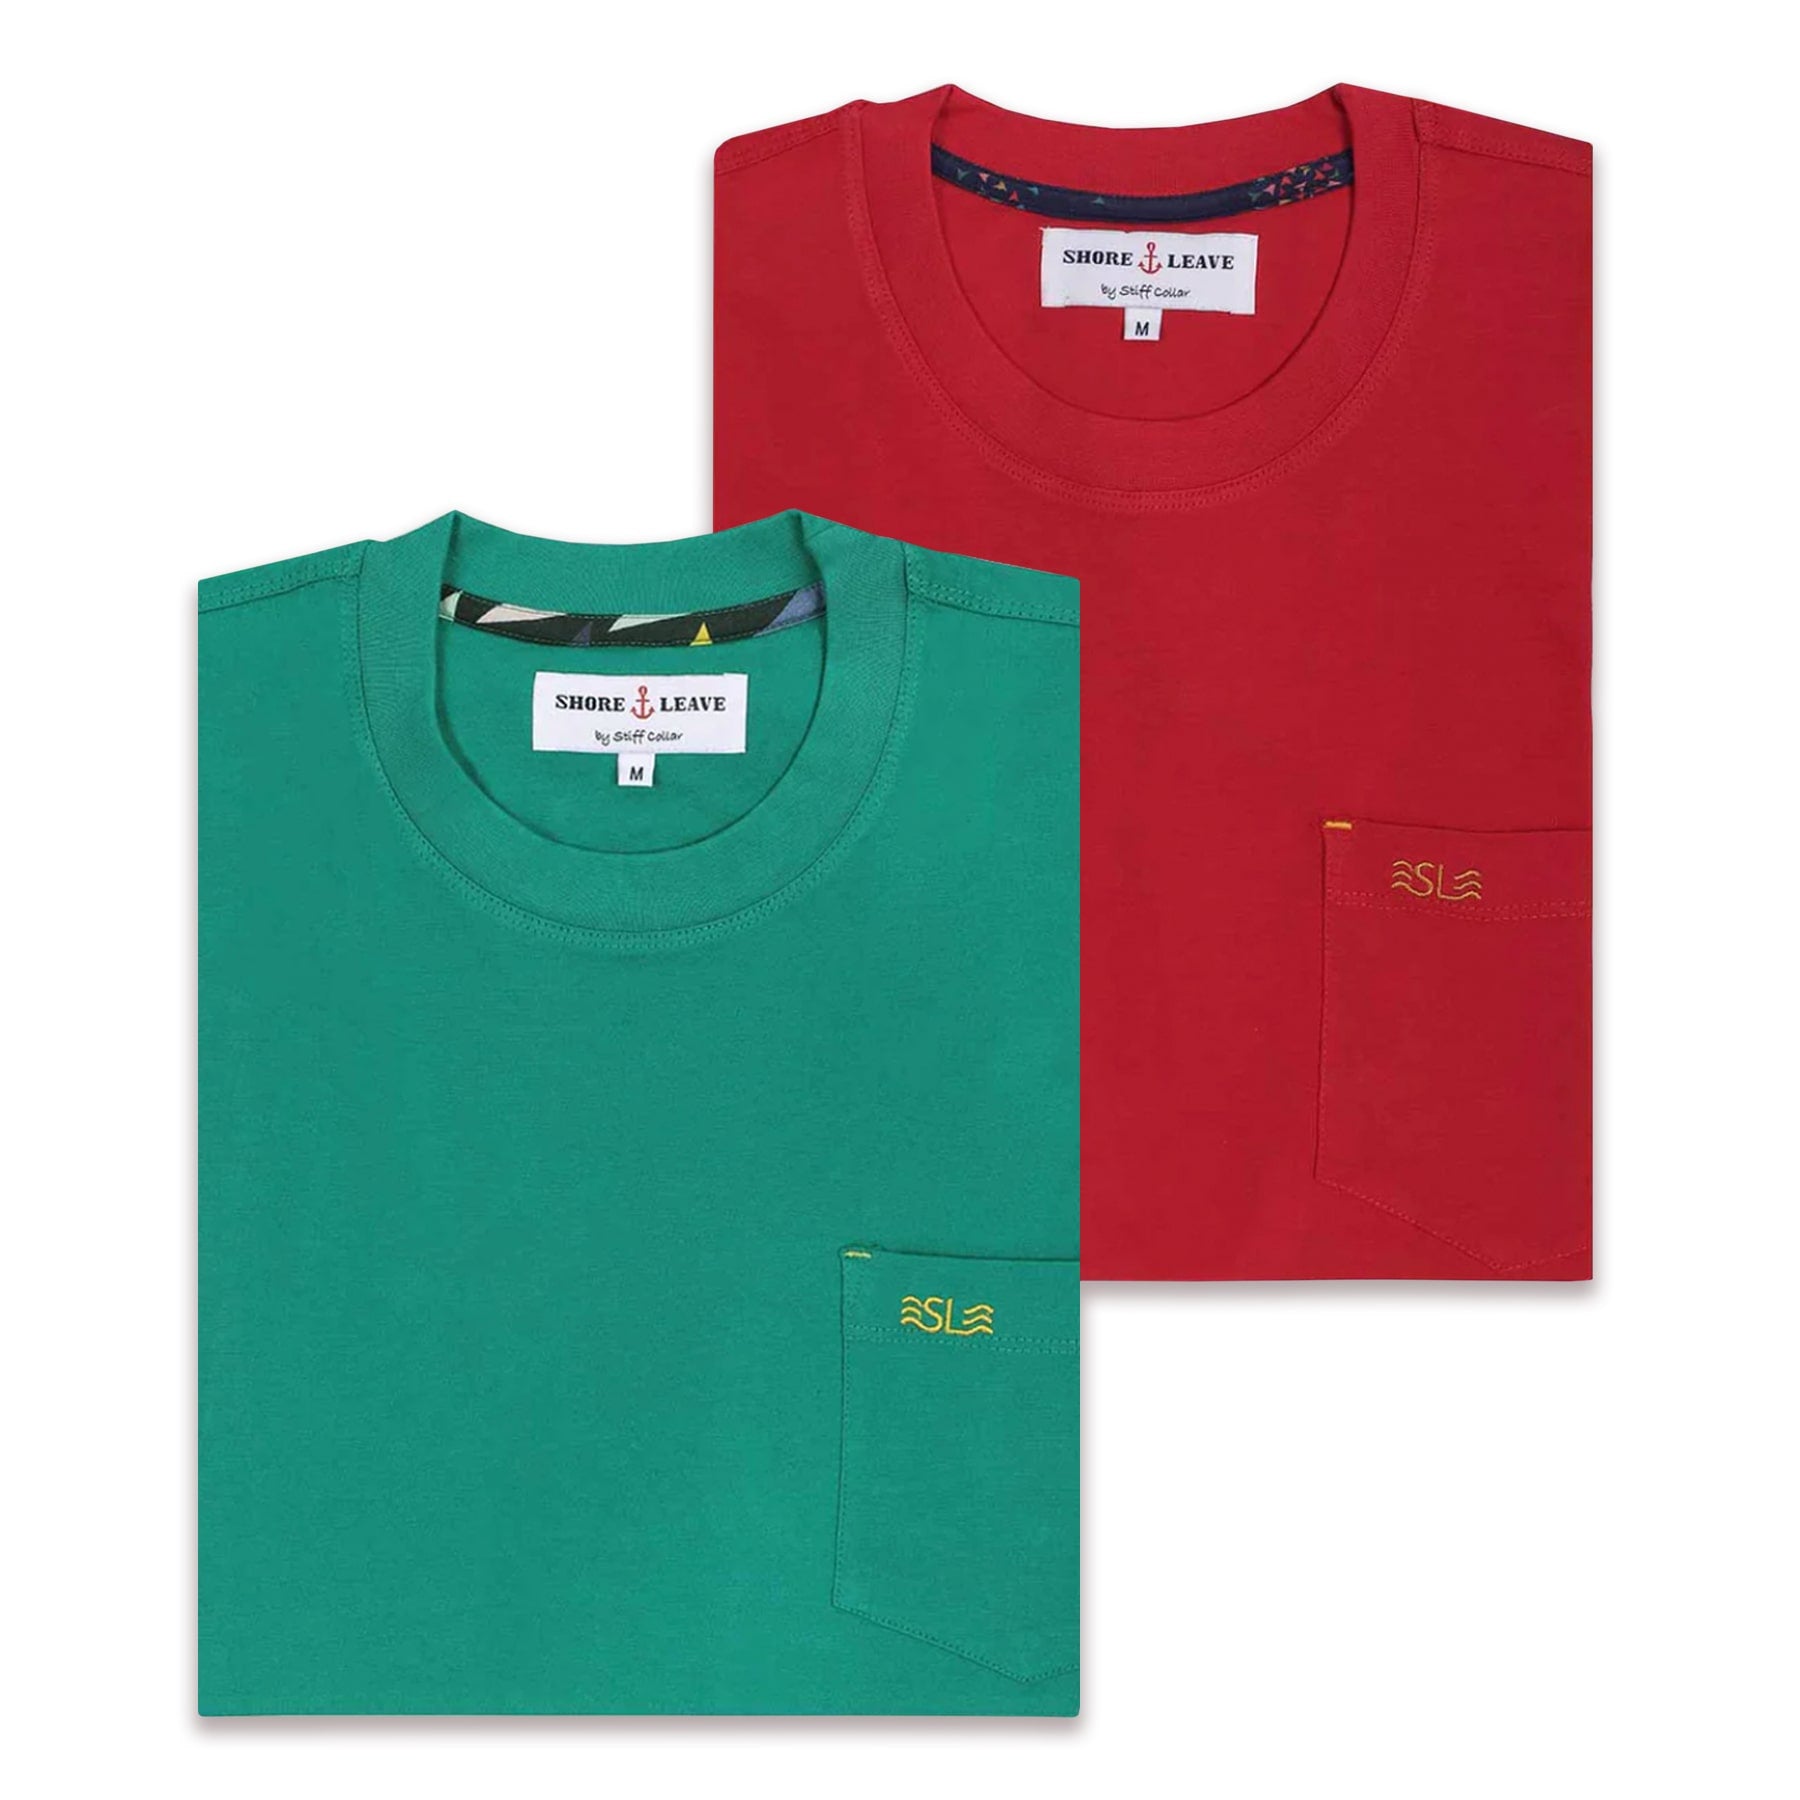 Bottle Green and Bright Red Round Neck Premium Washed T-Shirt combo.